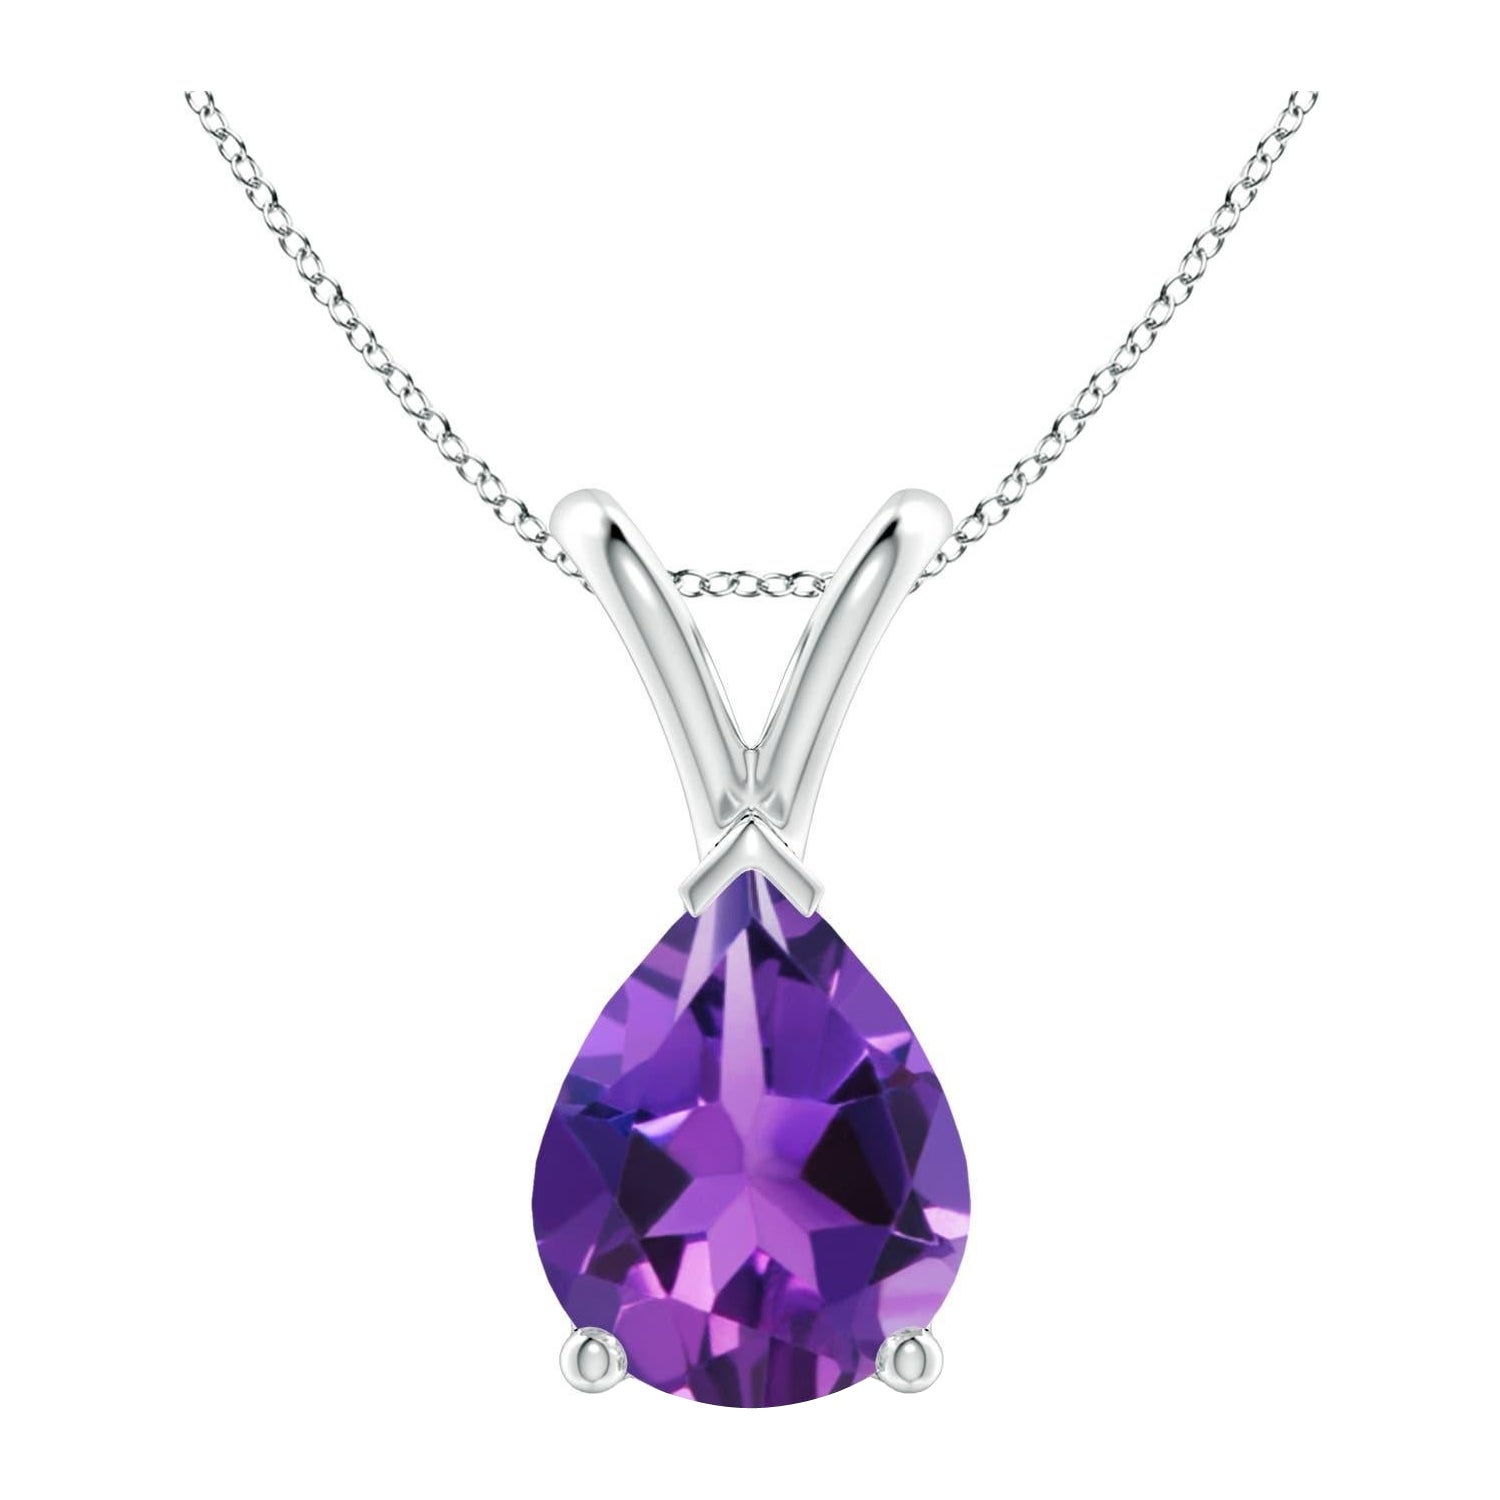 ANGARA Natural Pear-Shaped 1.5ct Amethyst Solitaire Pendant in 14K White Gold